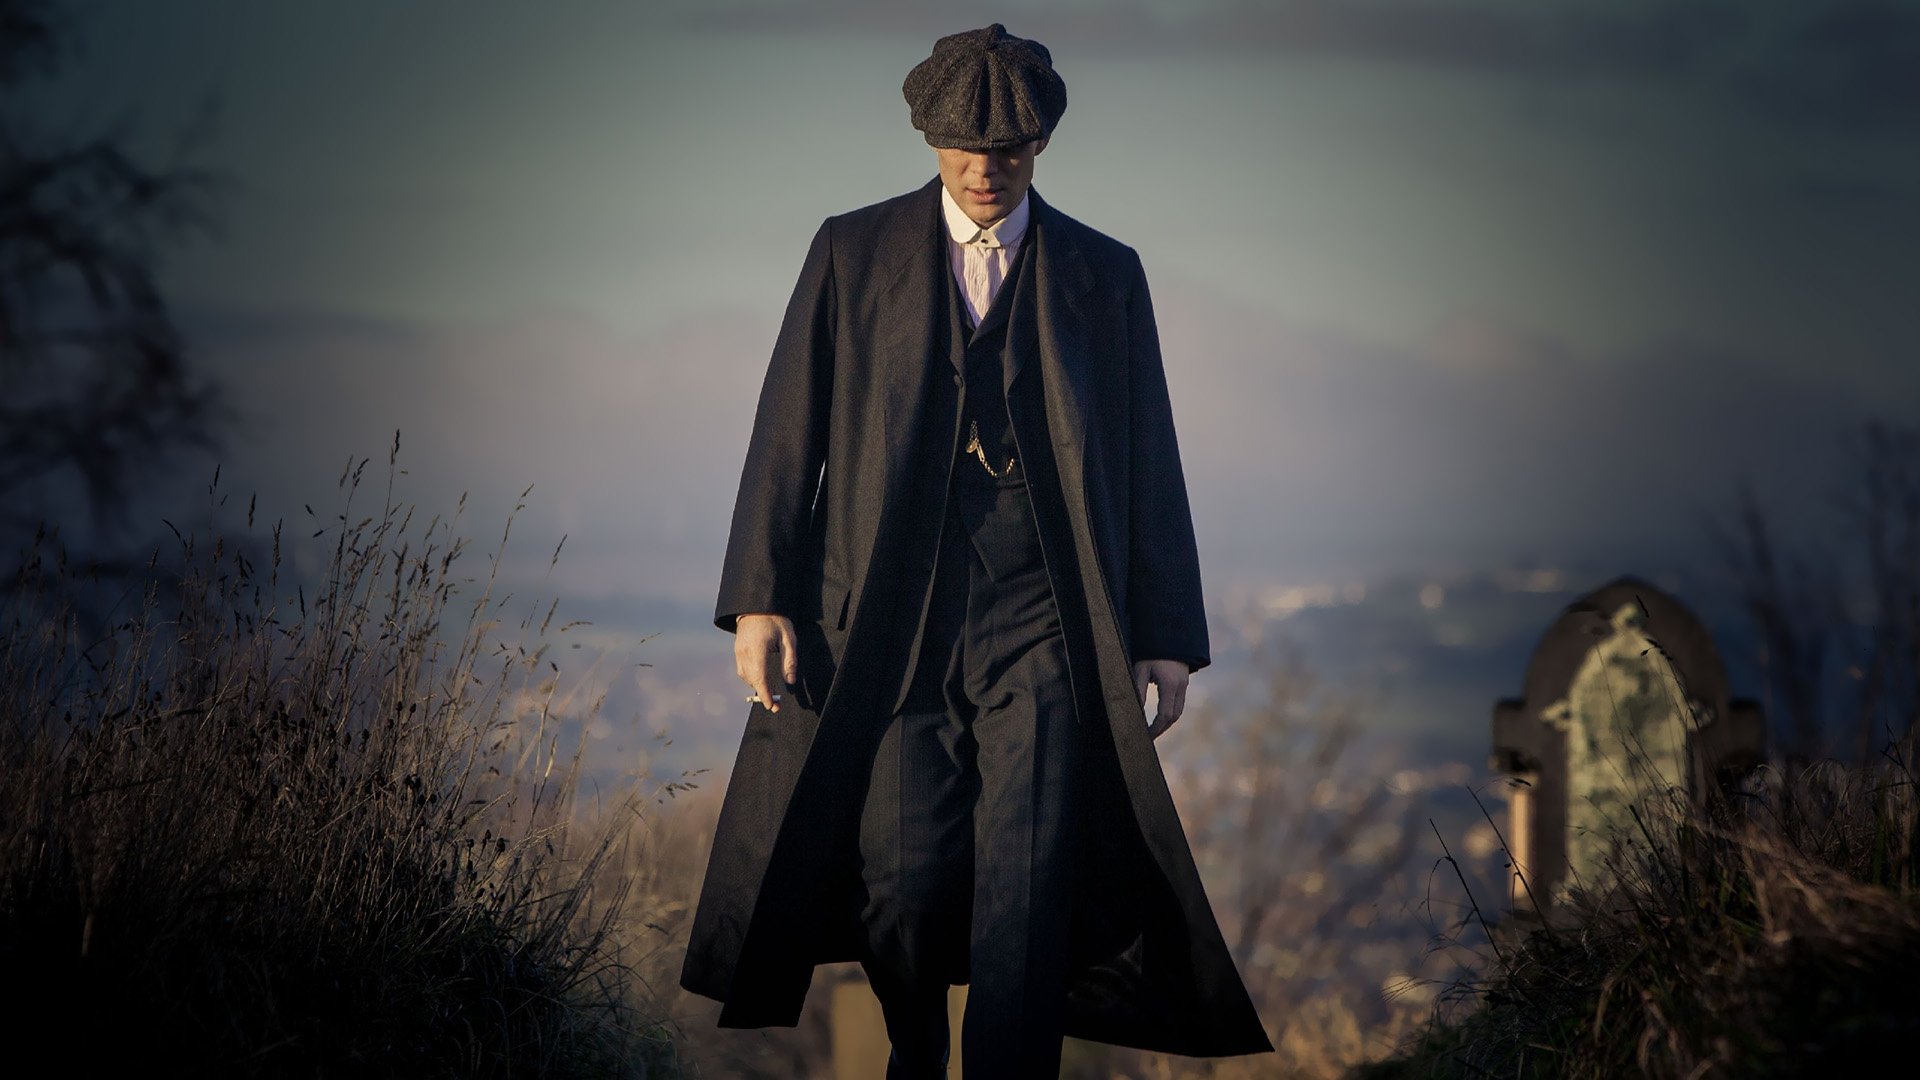 230+ Peaky Blinders HD Wallpapers and Backgrounds